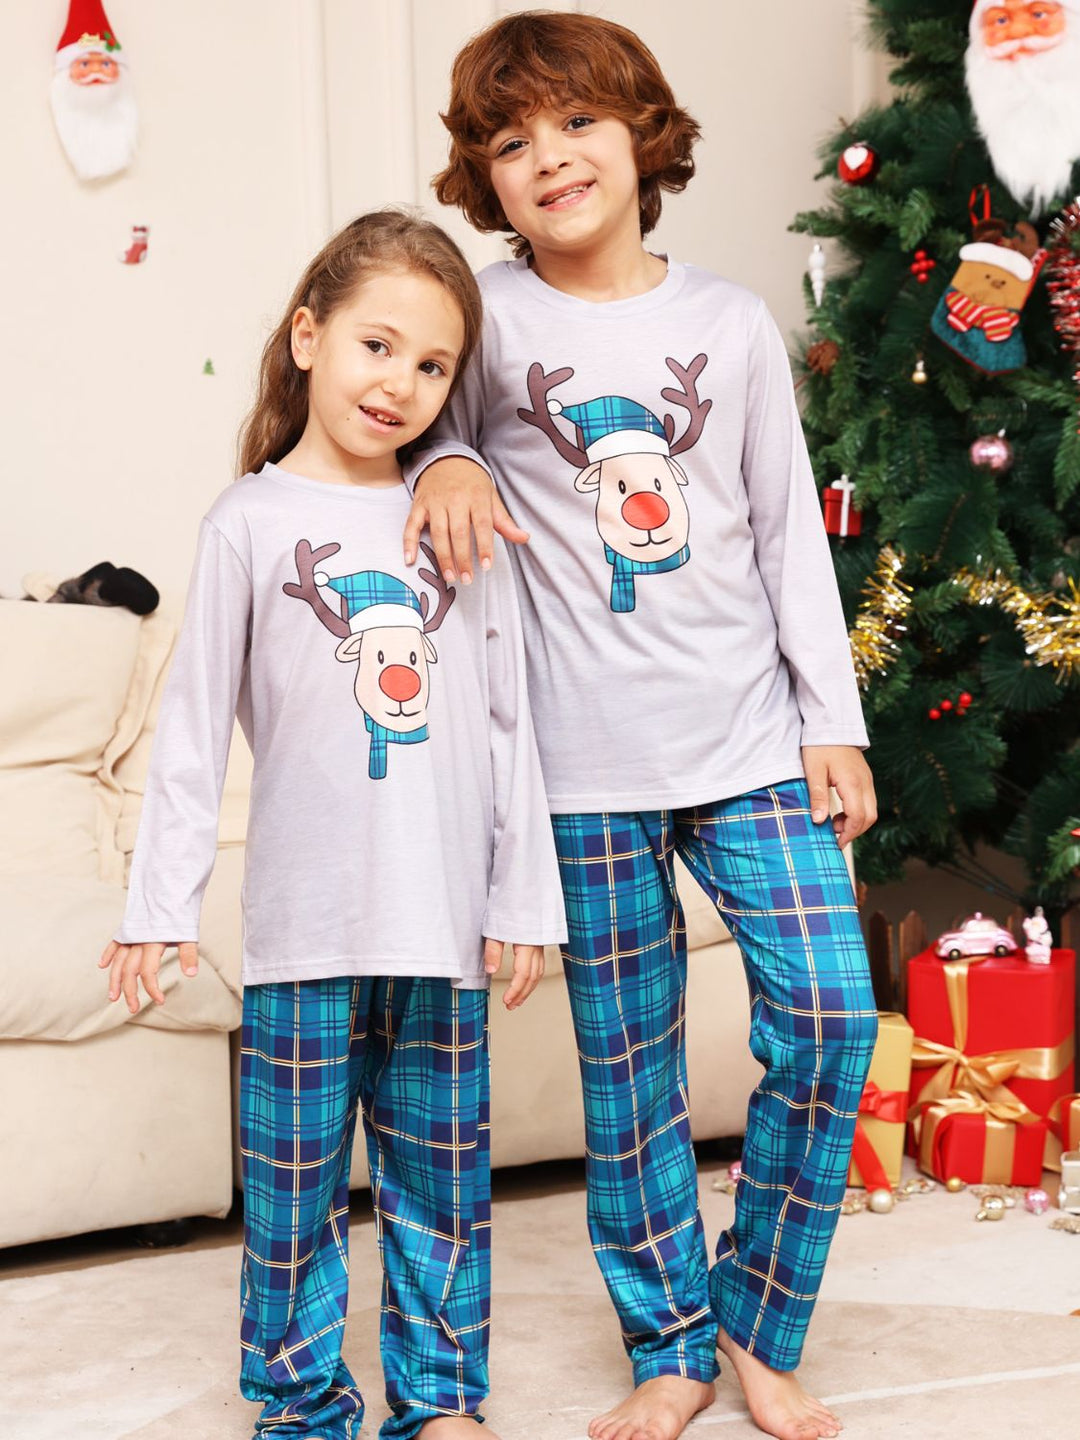 Toddler / Kids - Boys / Girls - Rudolph Graphic Long Sleeve Top and Plaid Pants Set - Sizes 2T- Kids 14